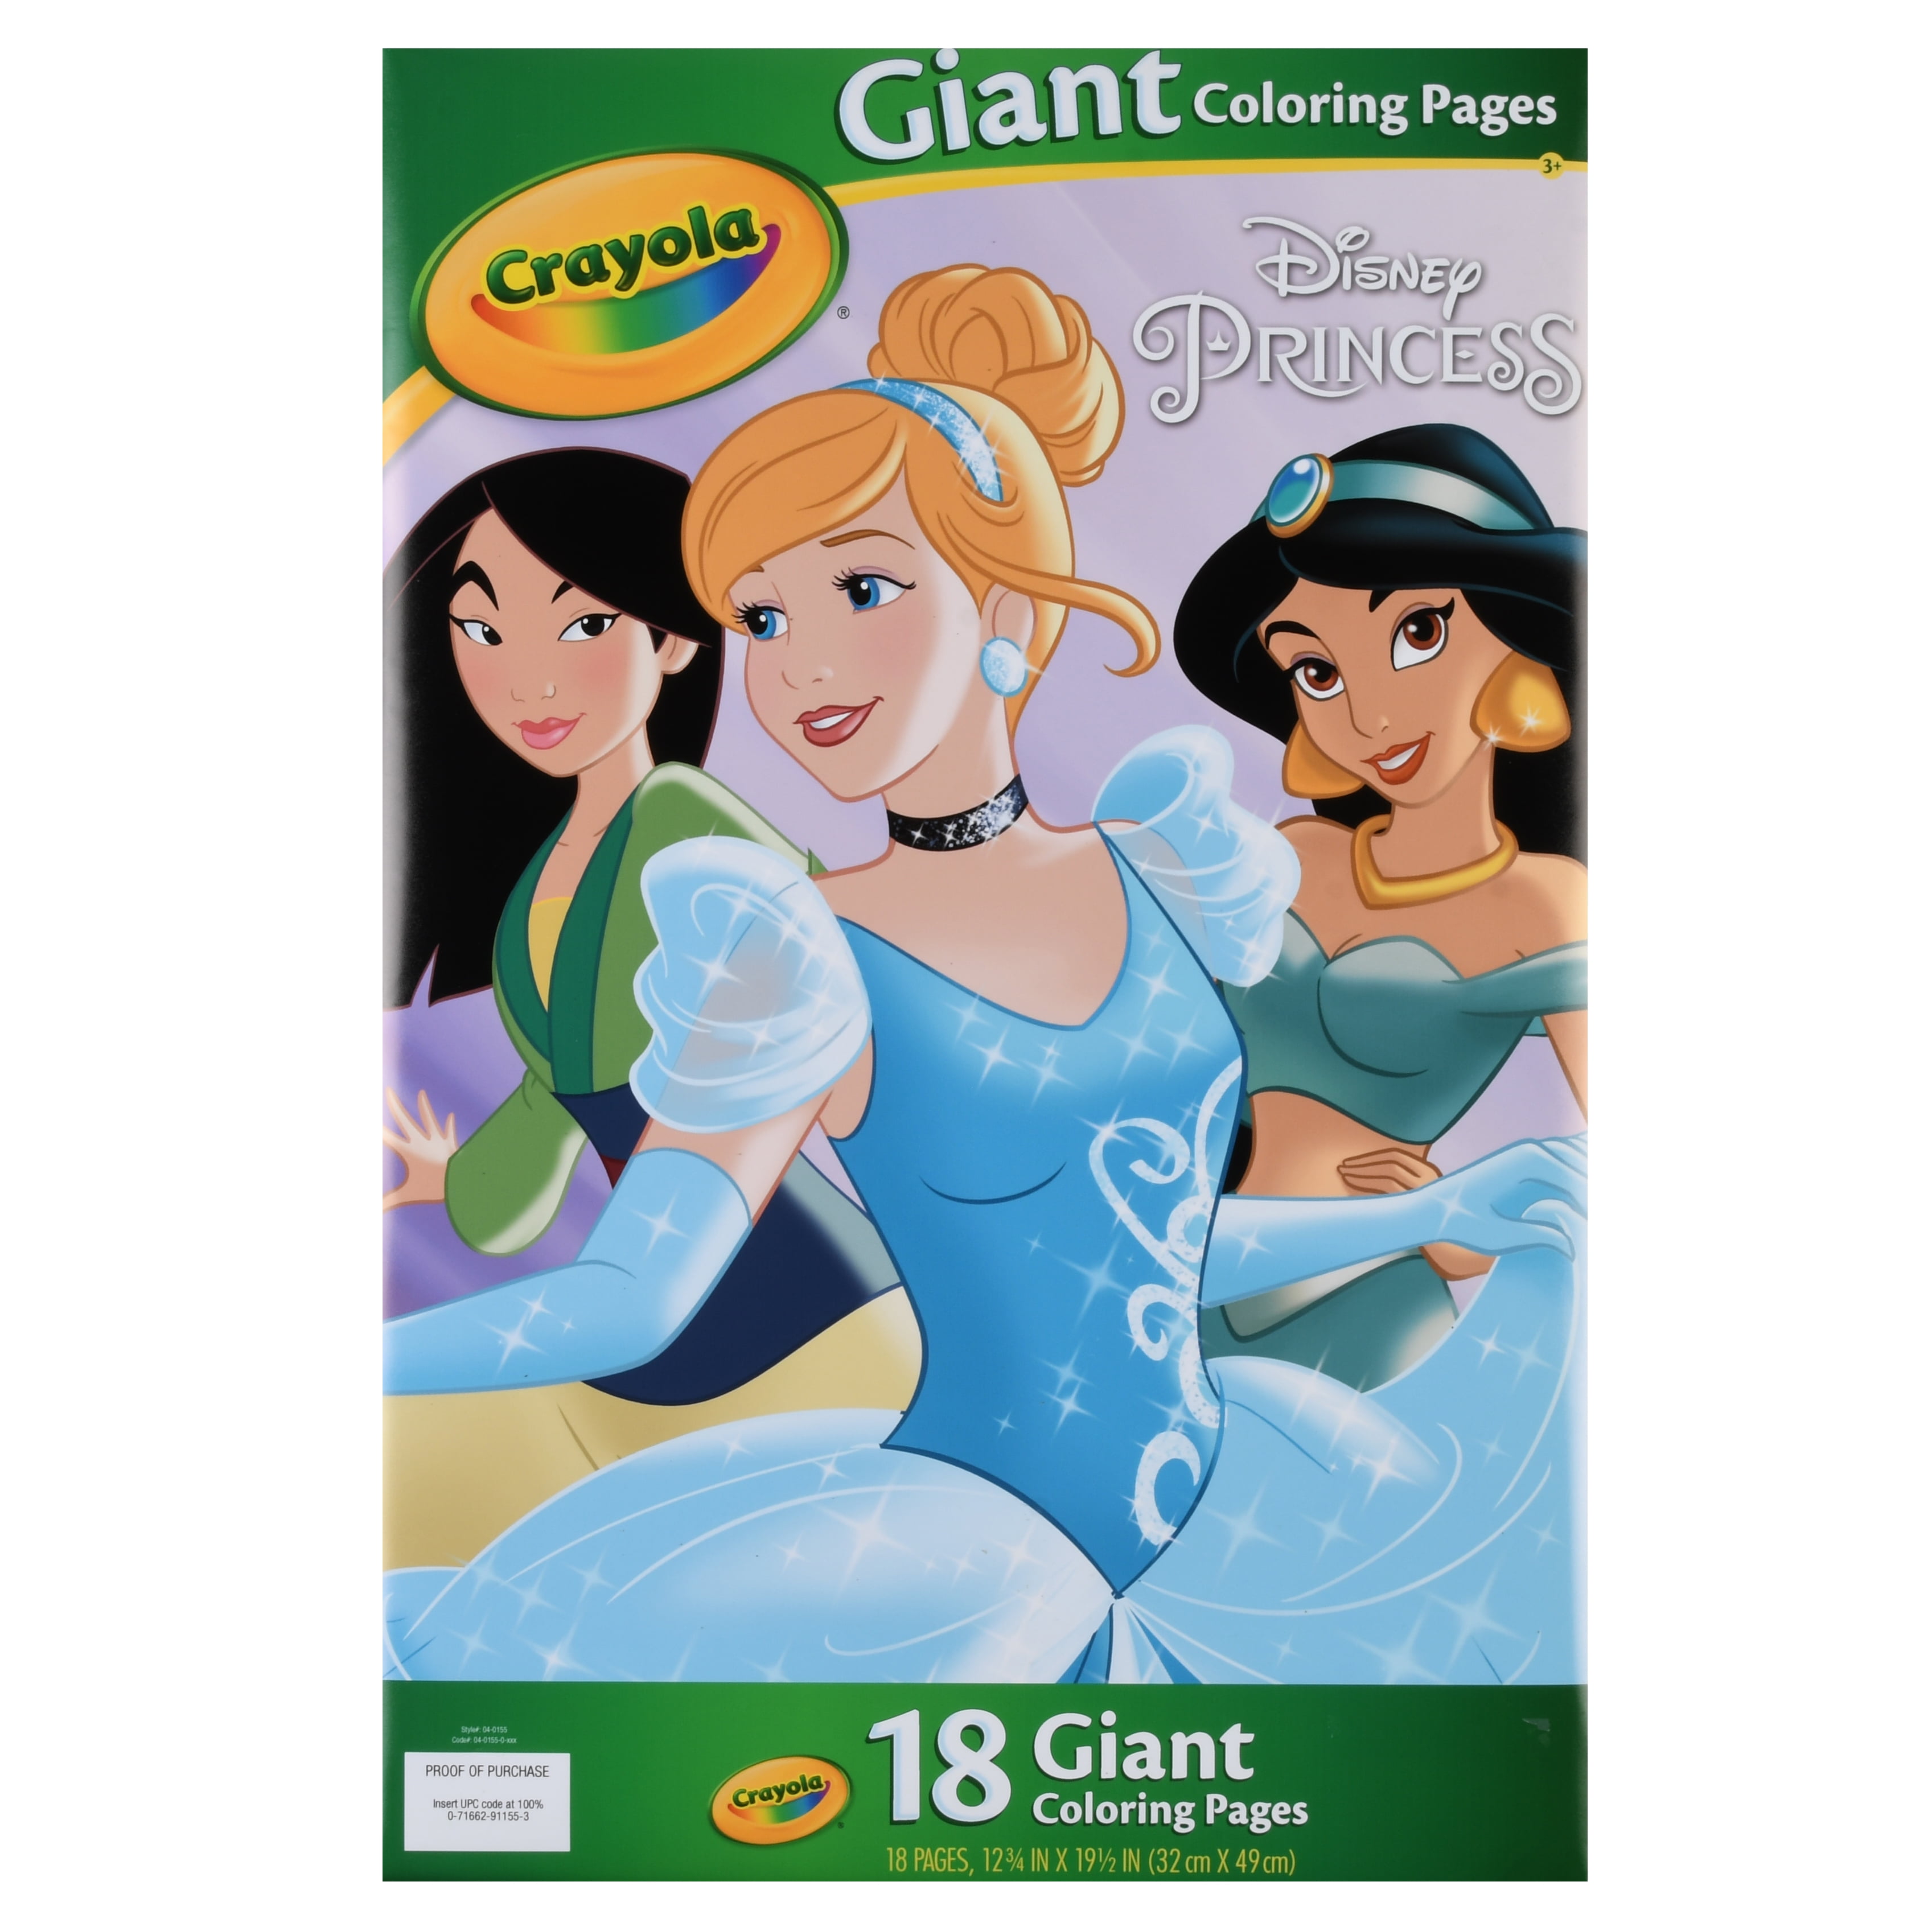 Crayola Disney Princess Coloring Pages, Giant Coloring Pages, 20 Count